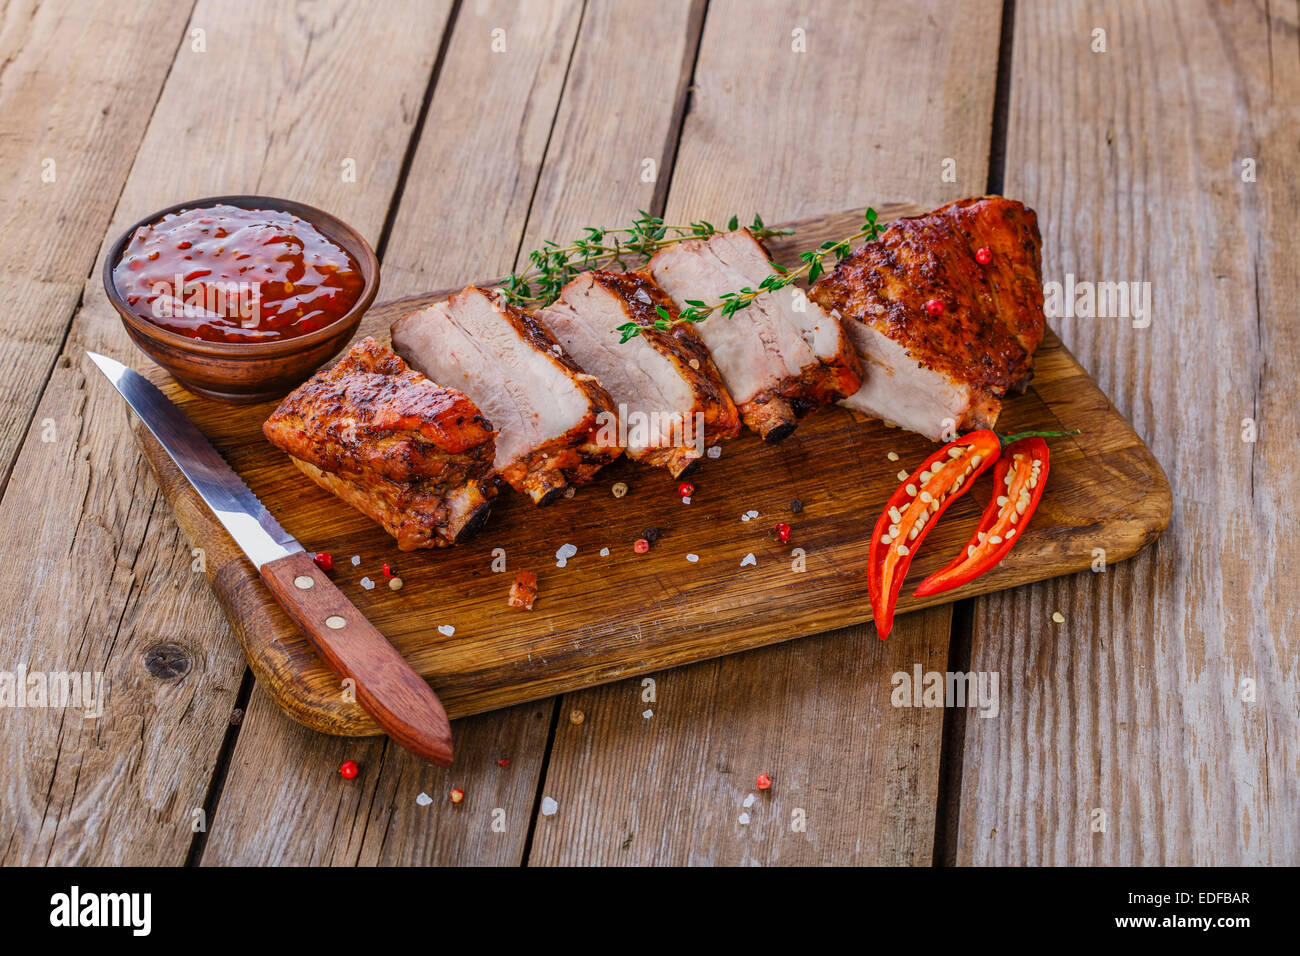 baked pork ribs on a wooden board Stock Photo